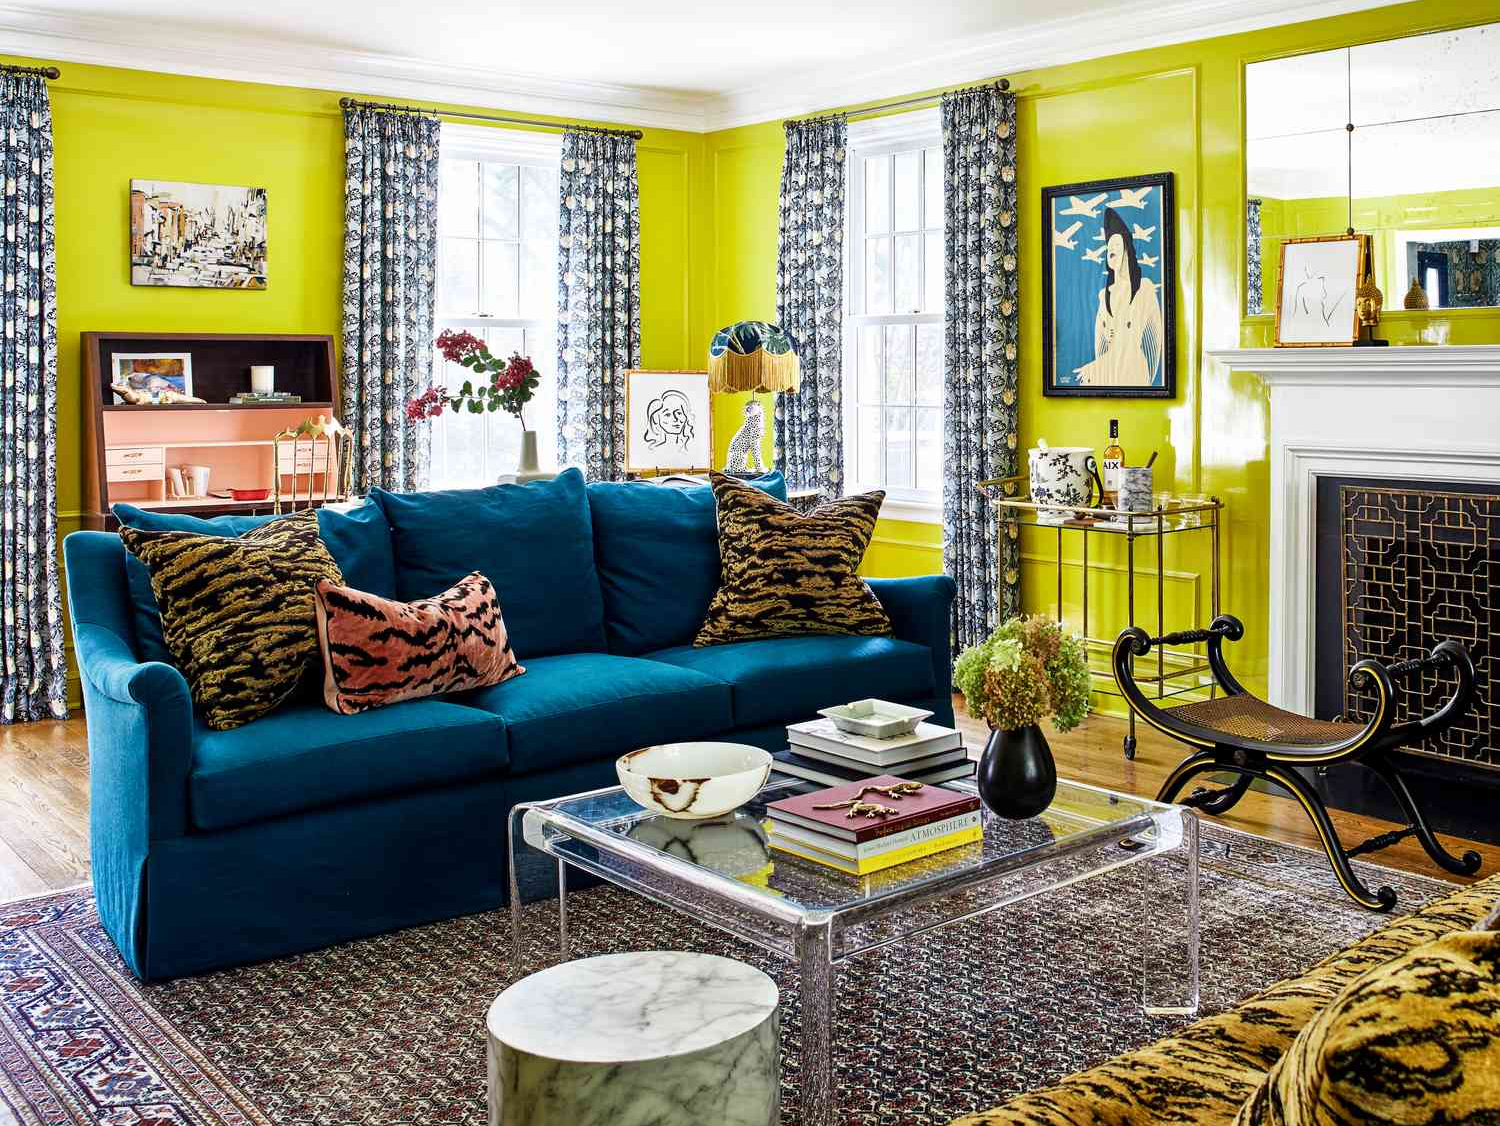 Maximalist Living Room: Overwhelming in a Great Way!